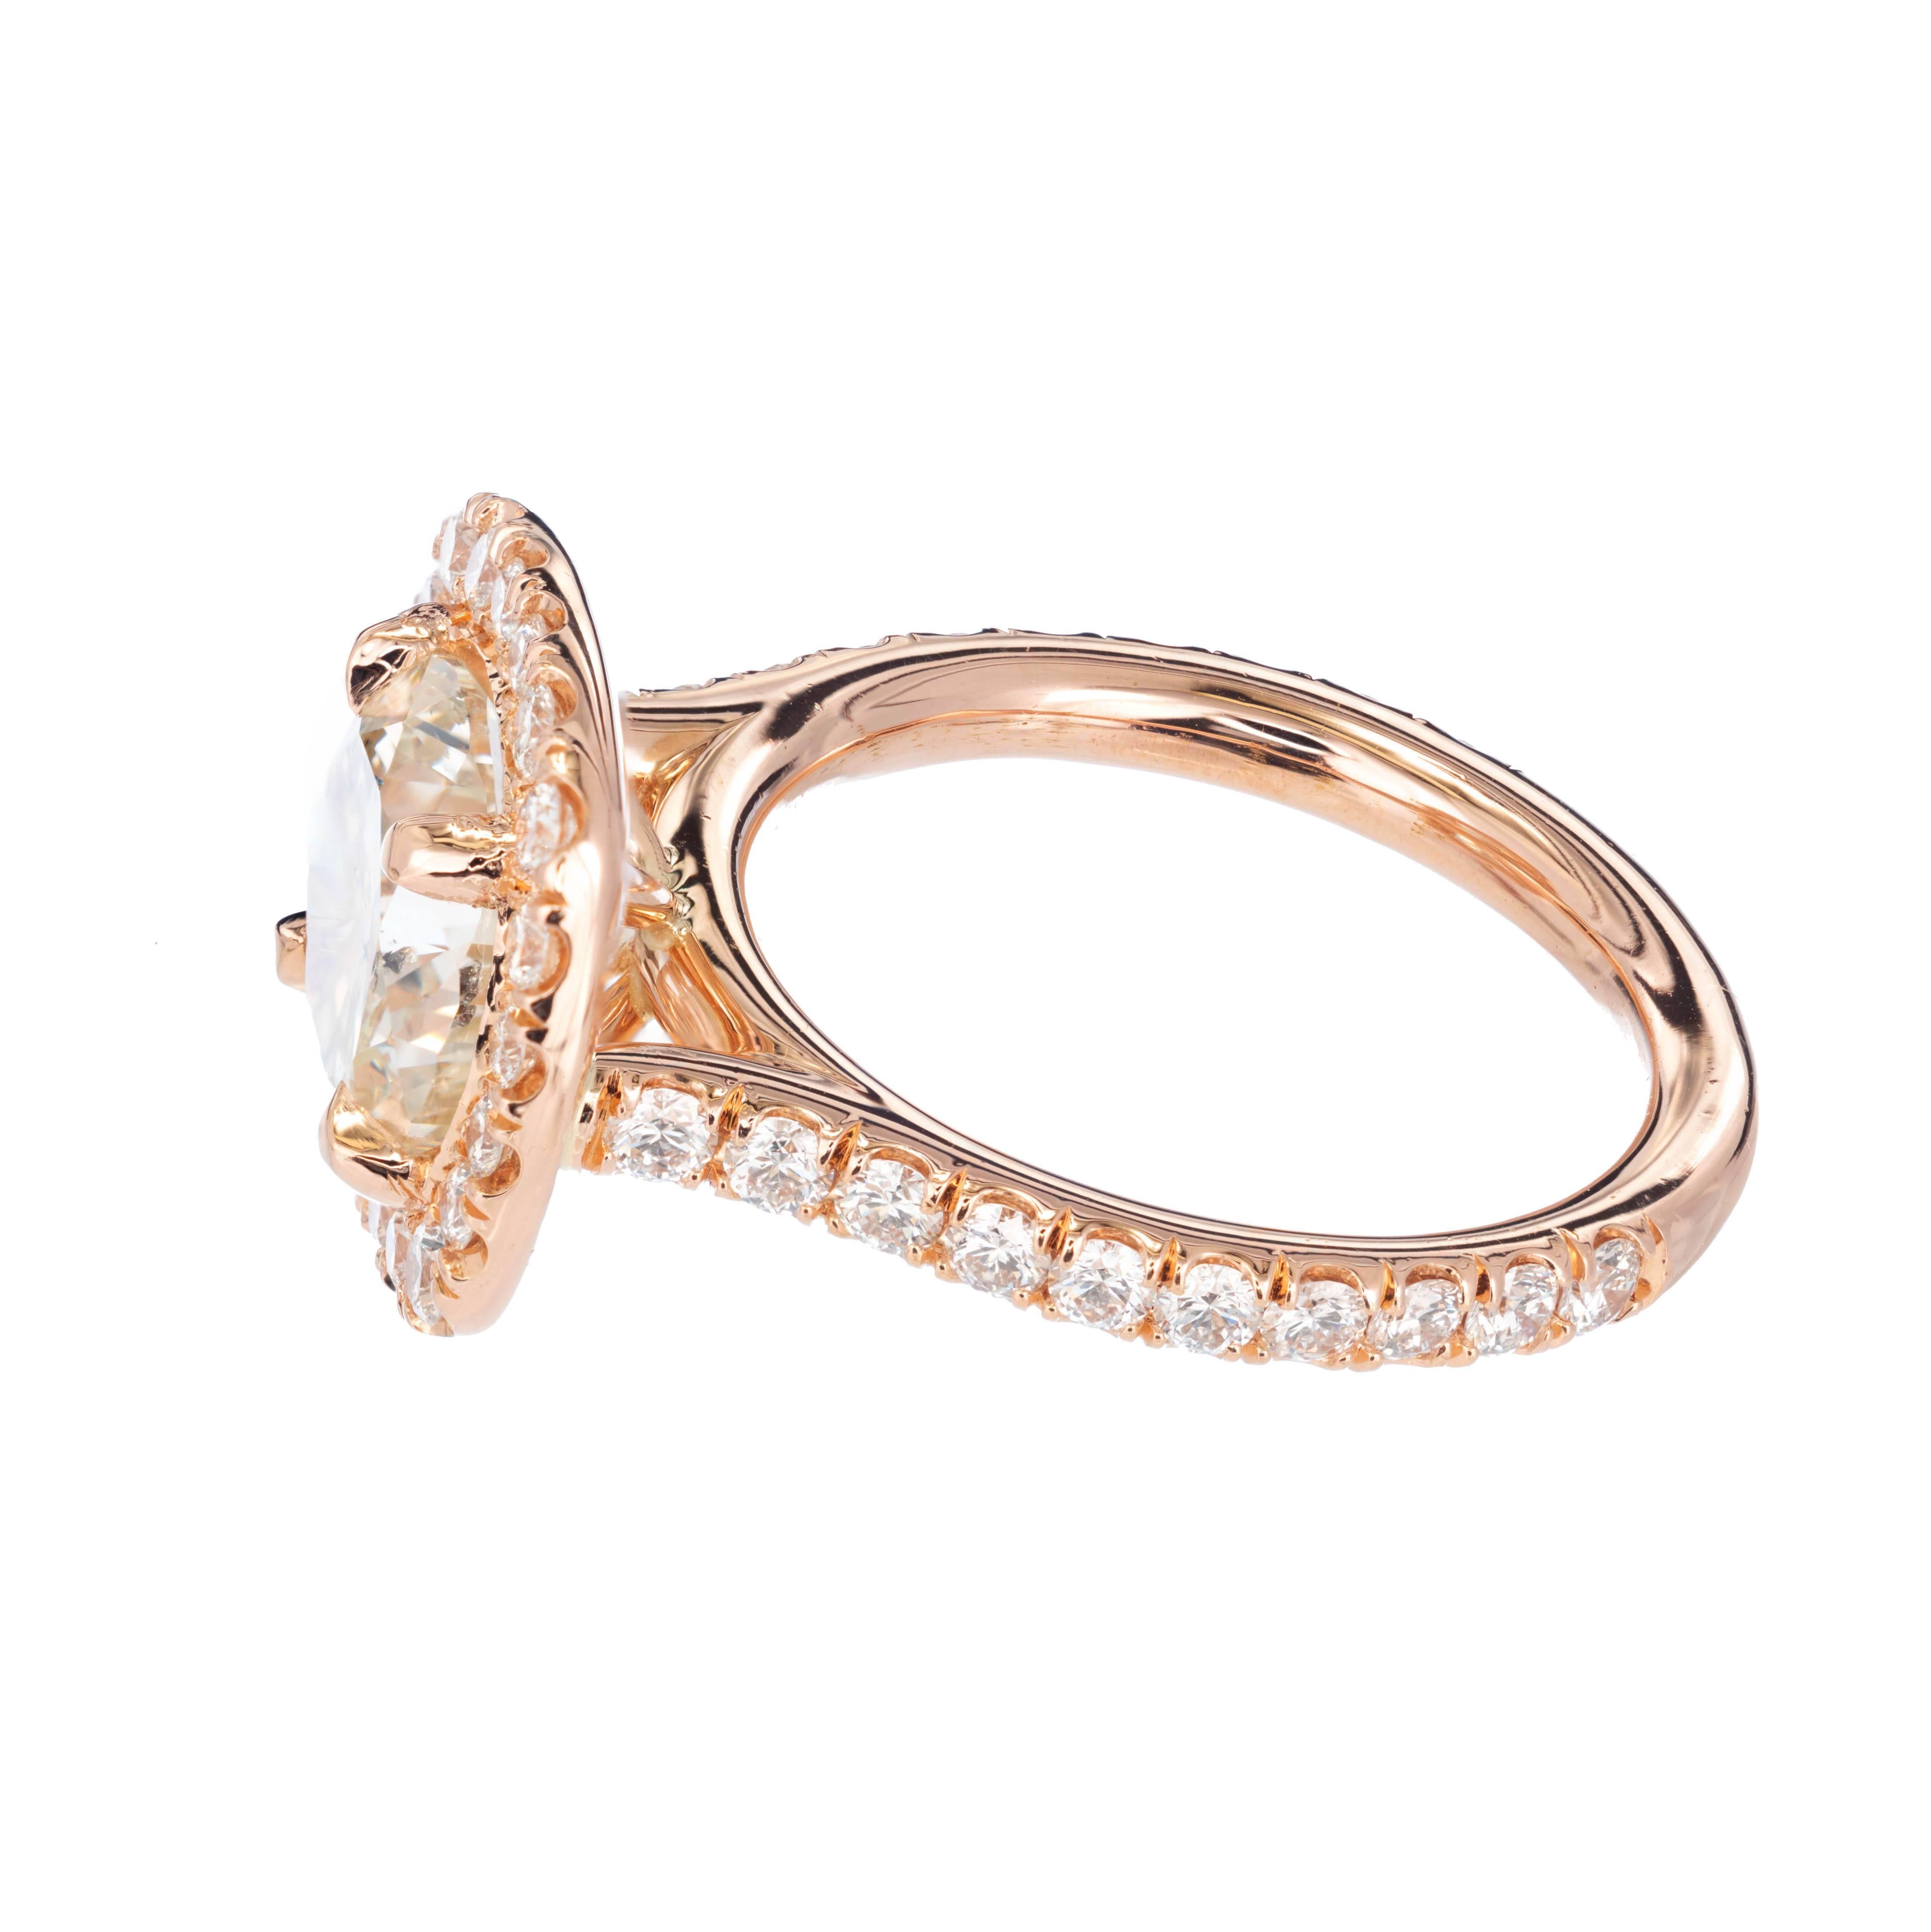 Peter Suchy 3.04 Carat Diamond Halo Rose Gold Engagement Ring In Excellent Condition For Sale In Stamford, CT